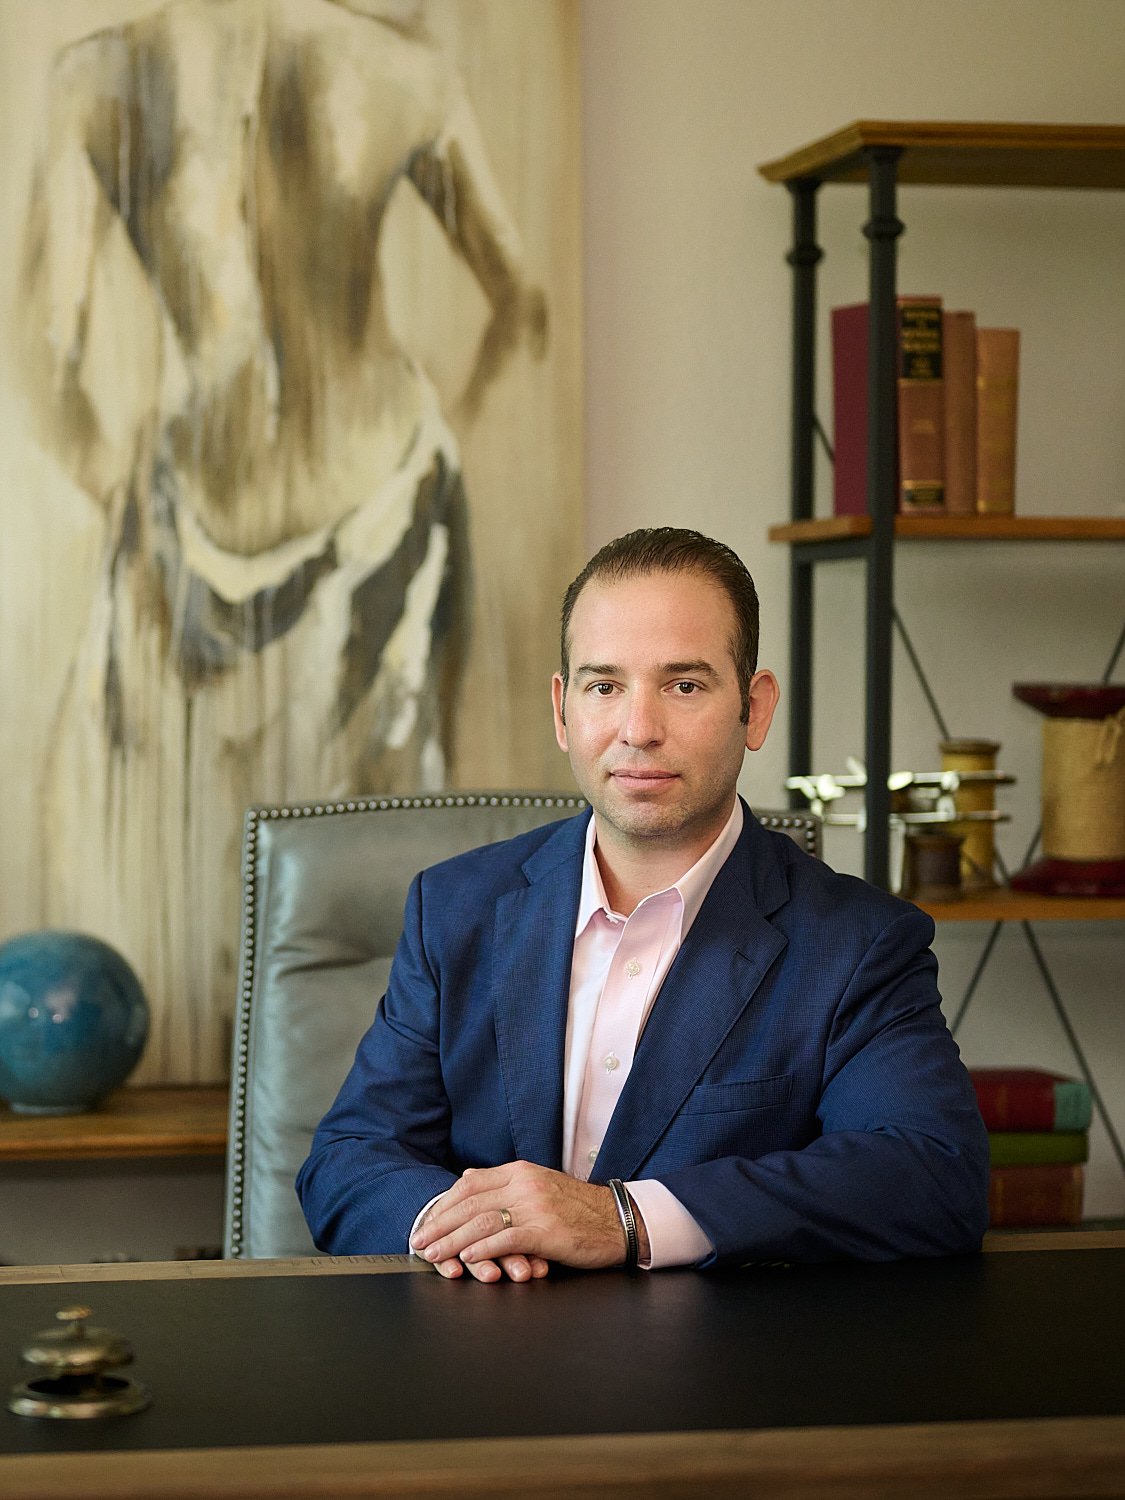  THE WOODLANDS, TEXAS - MARCH 2023: plastic surgeon is posing for environmental business headshots in his medical clinic full of beautiful artwork. He is dressed in a business suit without a tie 